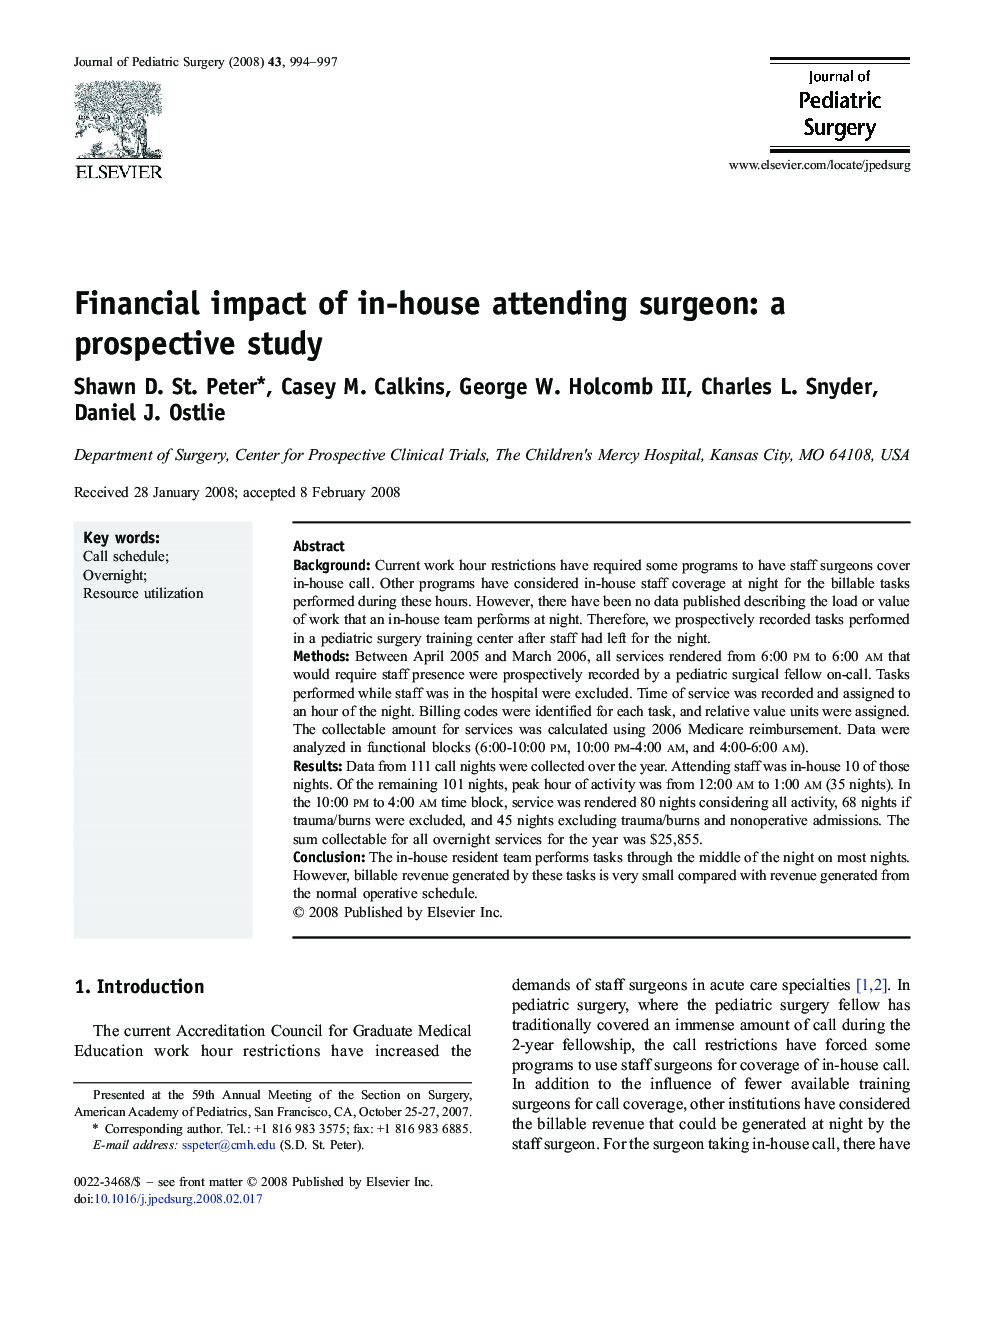 Financial impact of in-house attending surgeon: a prospective study